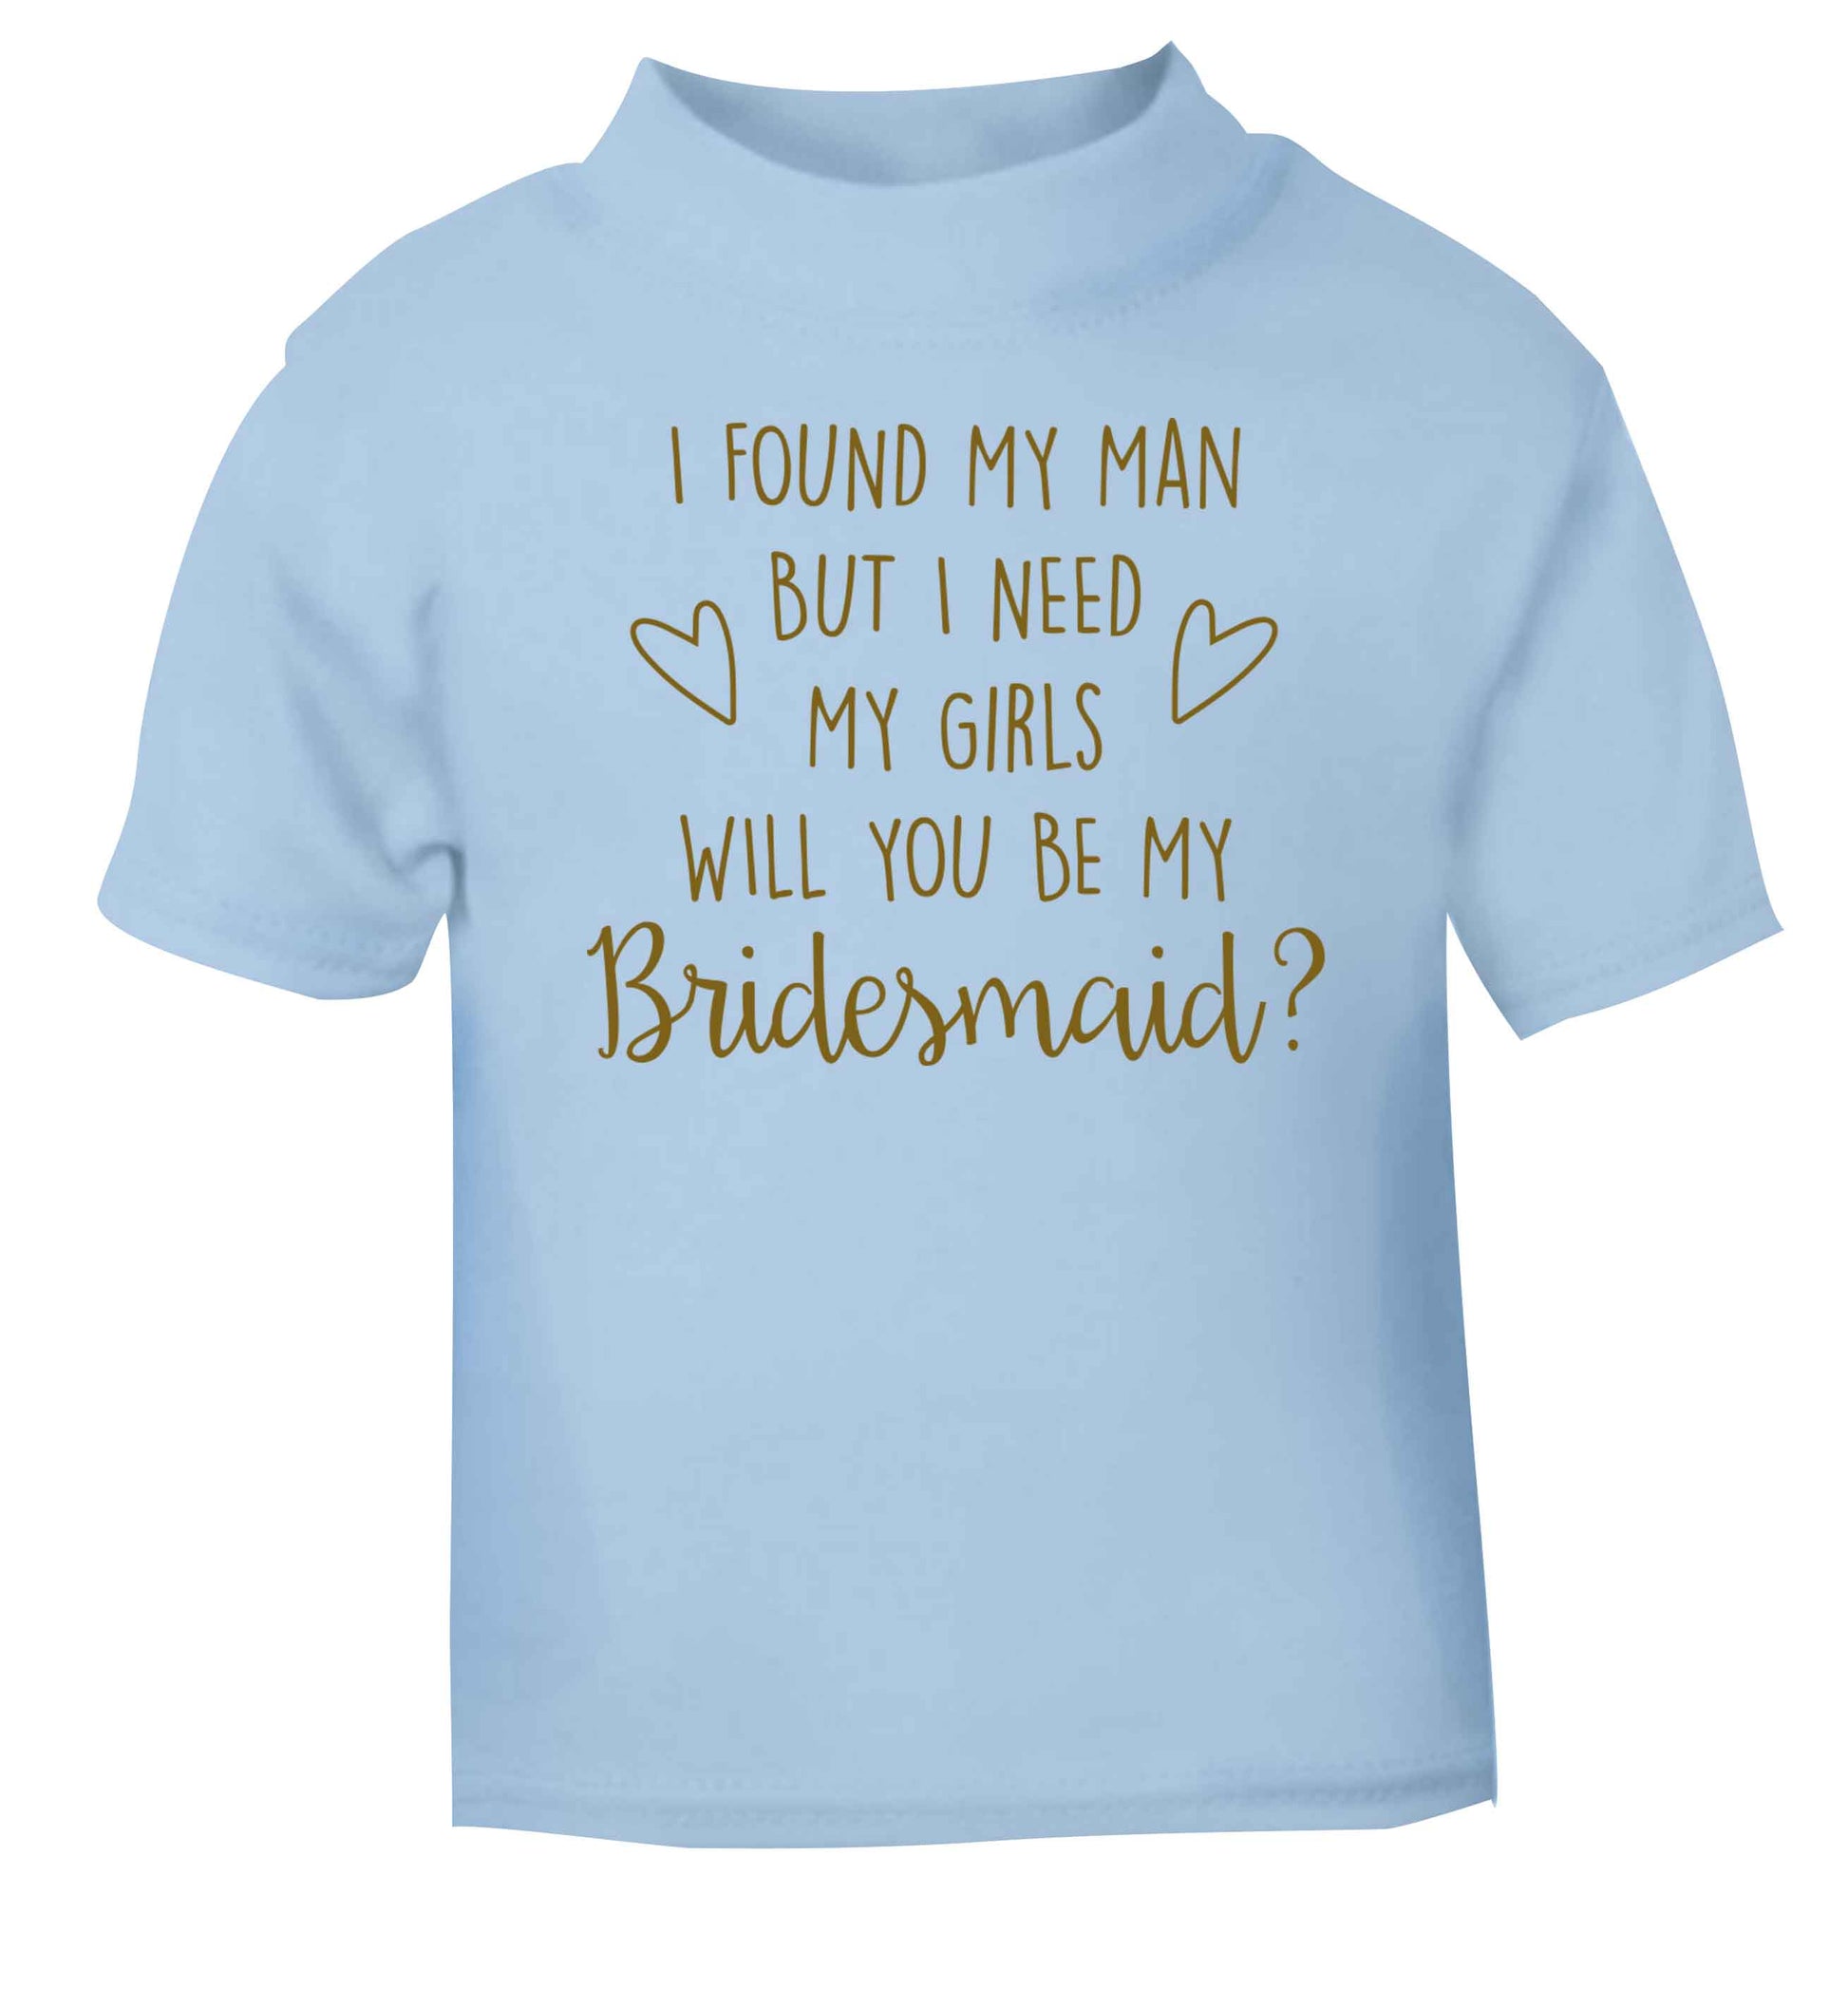 I found my man but I need my girls will you be my bridesmaid? light blue baby toddler Tshirt 2 Years